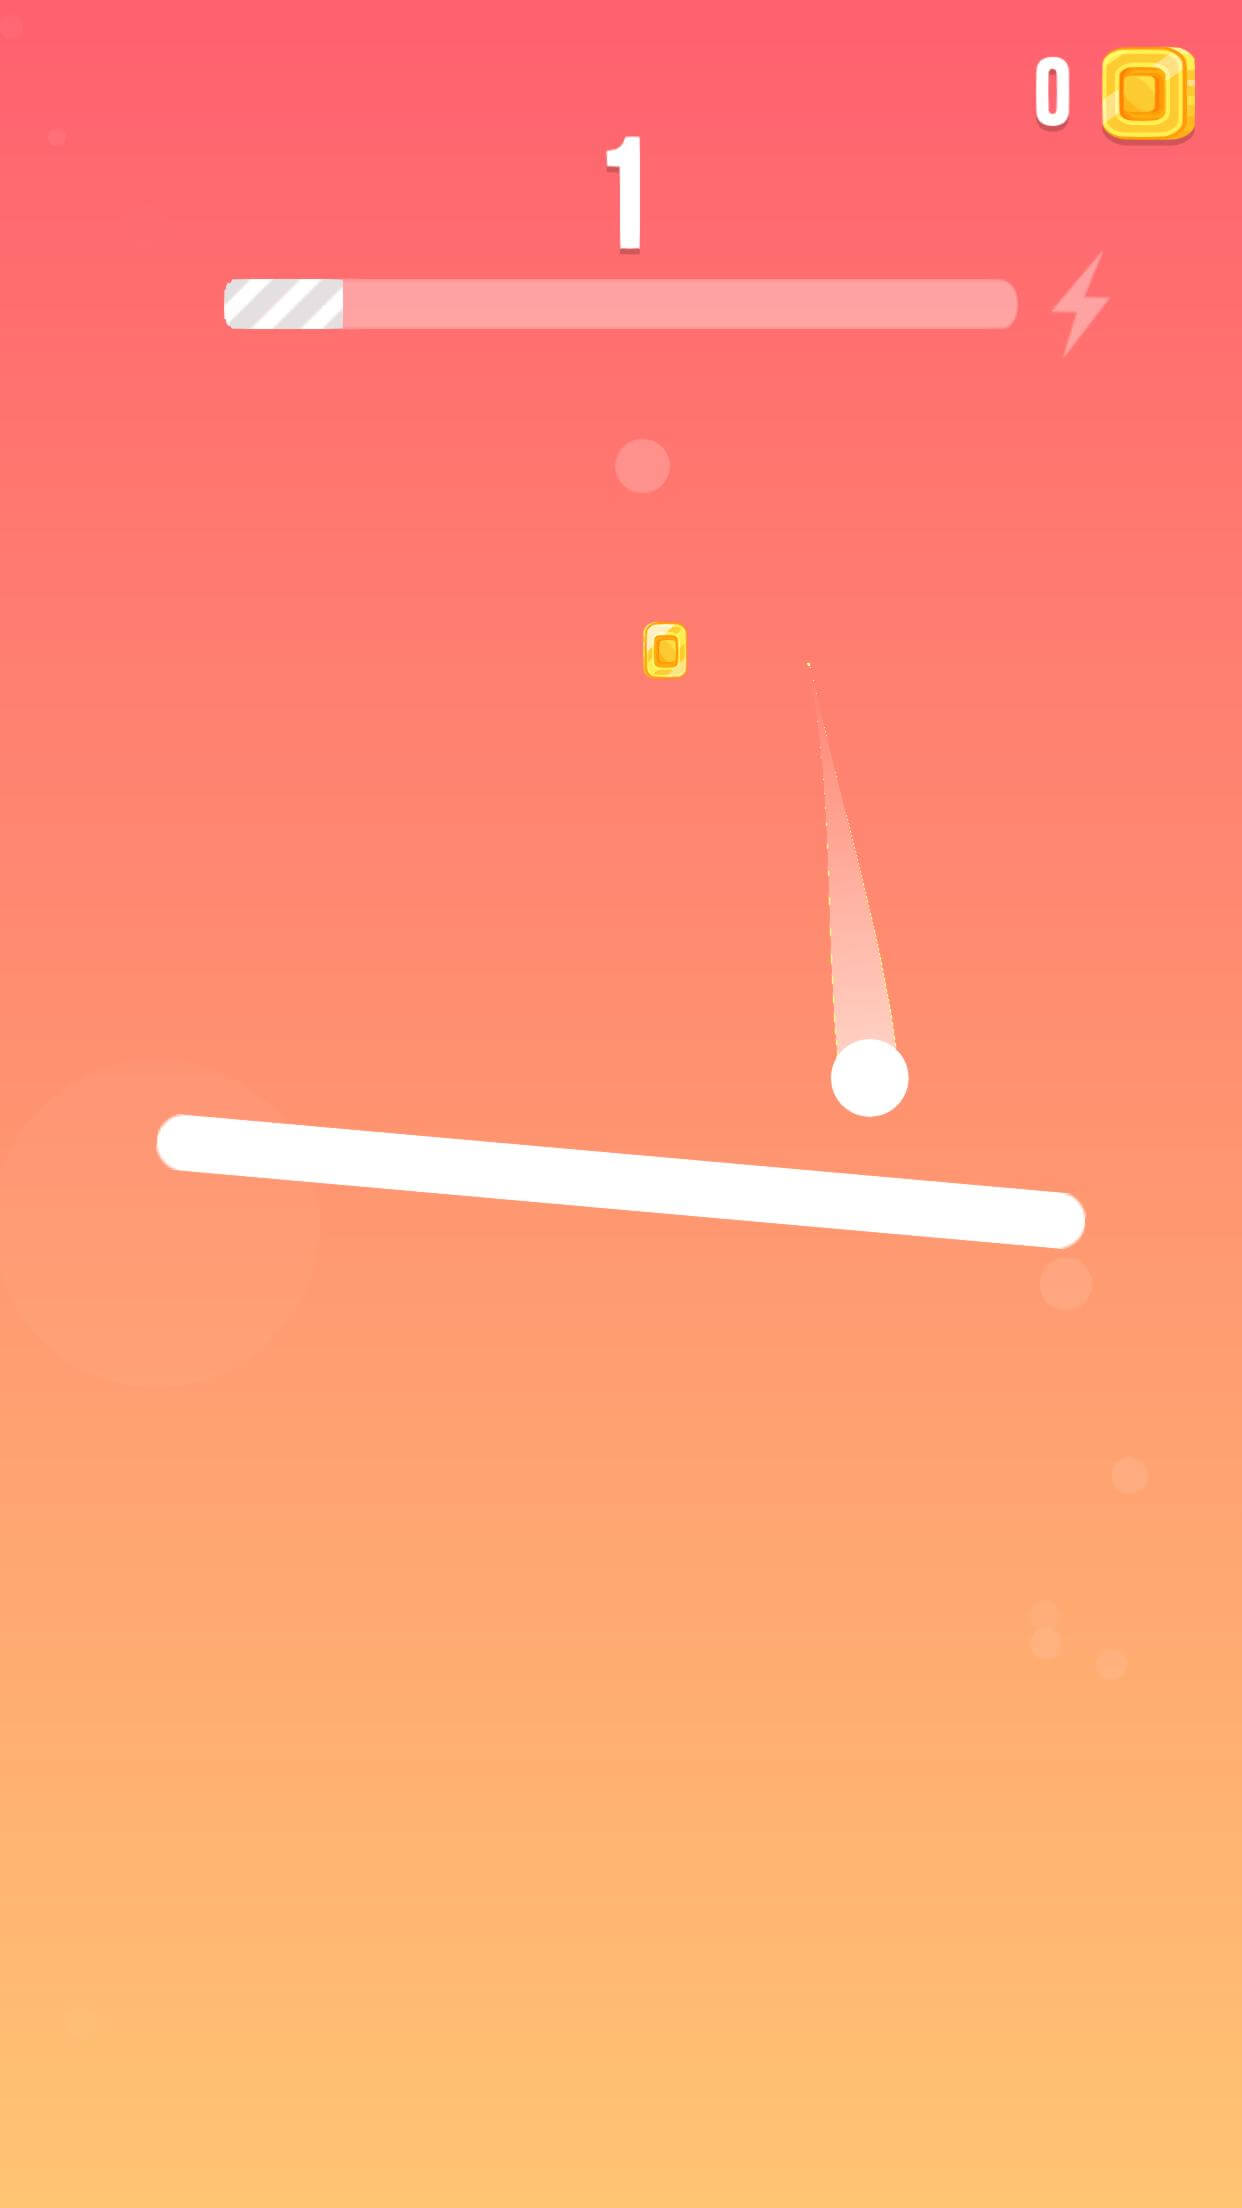 Ball Dropped Game Apple AppStore - Google Play Store Image 2